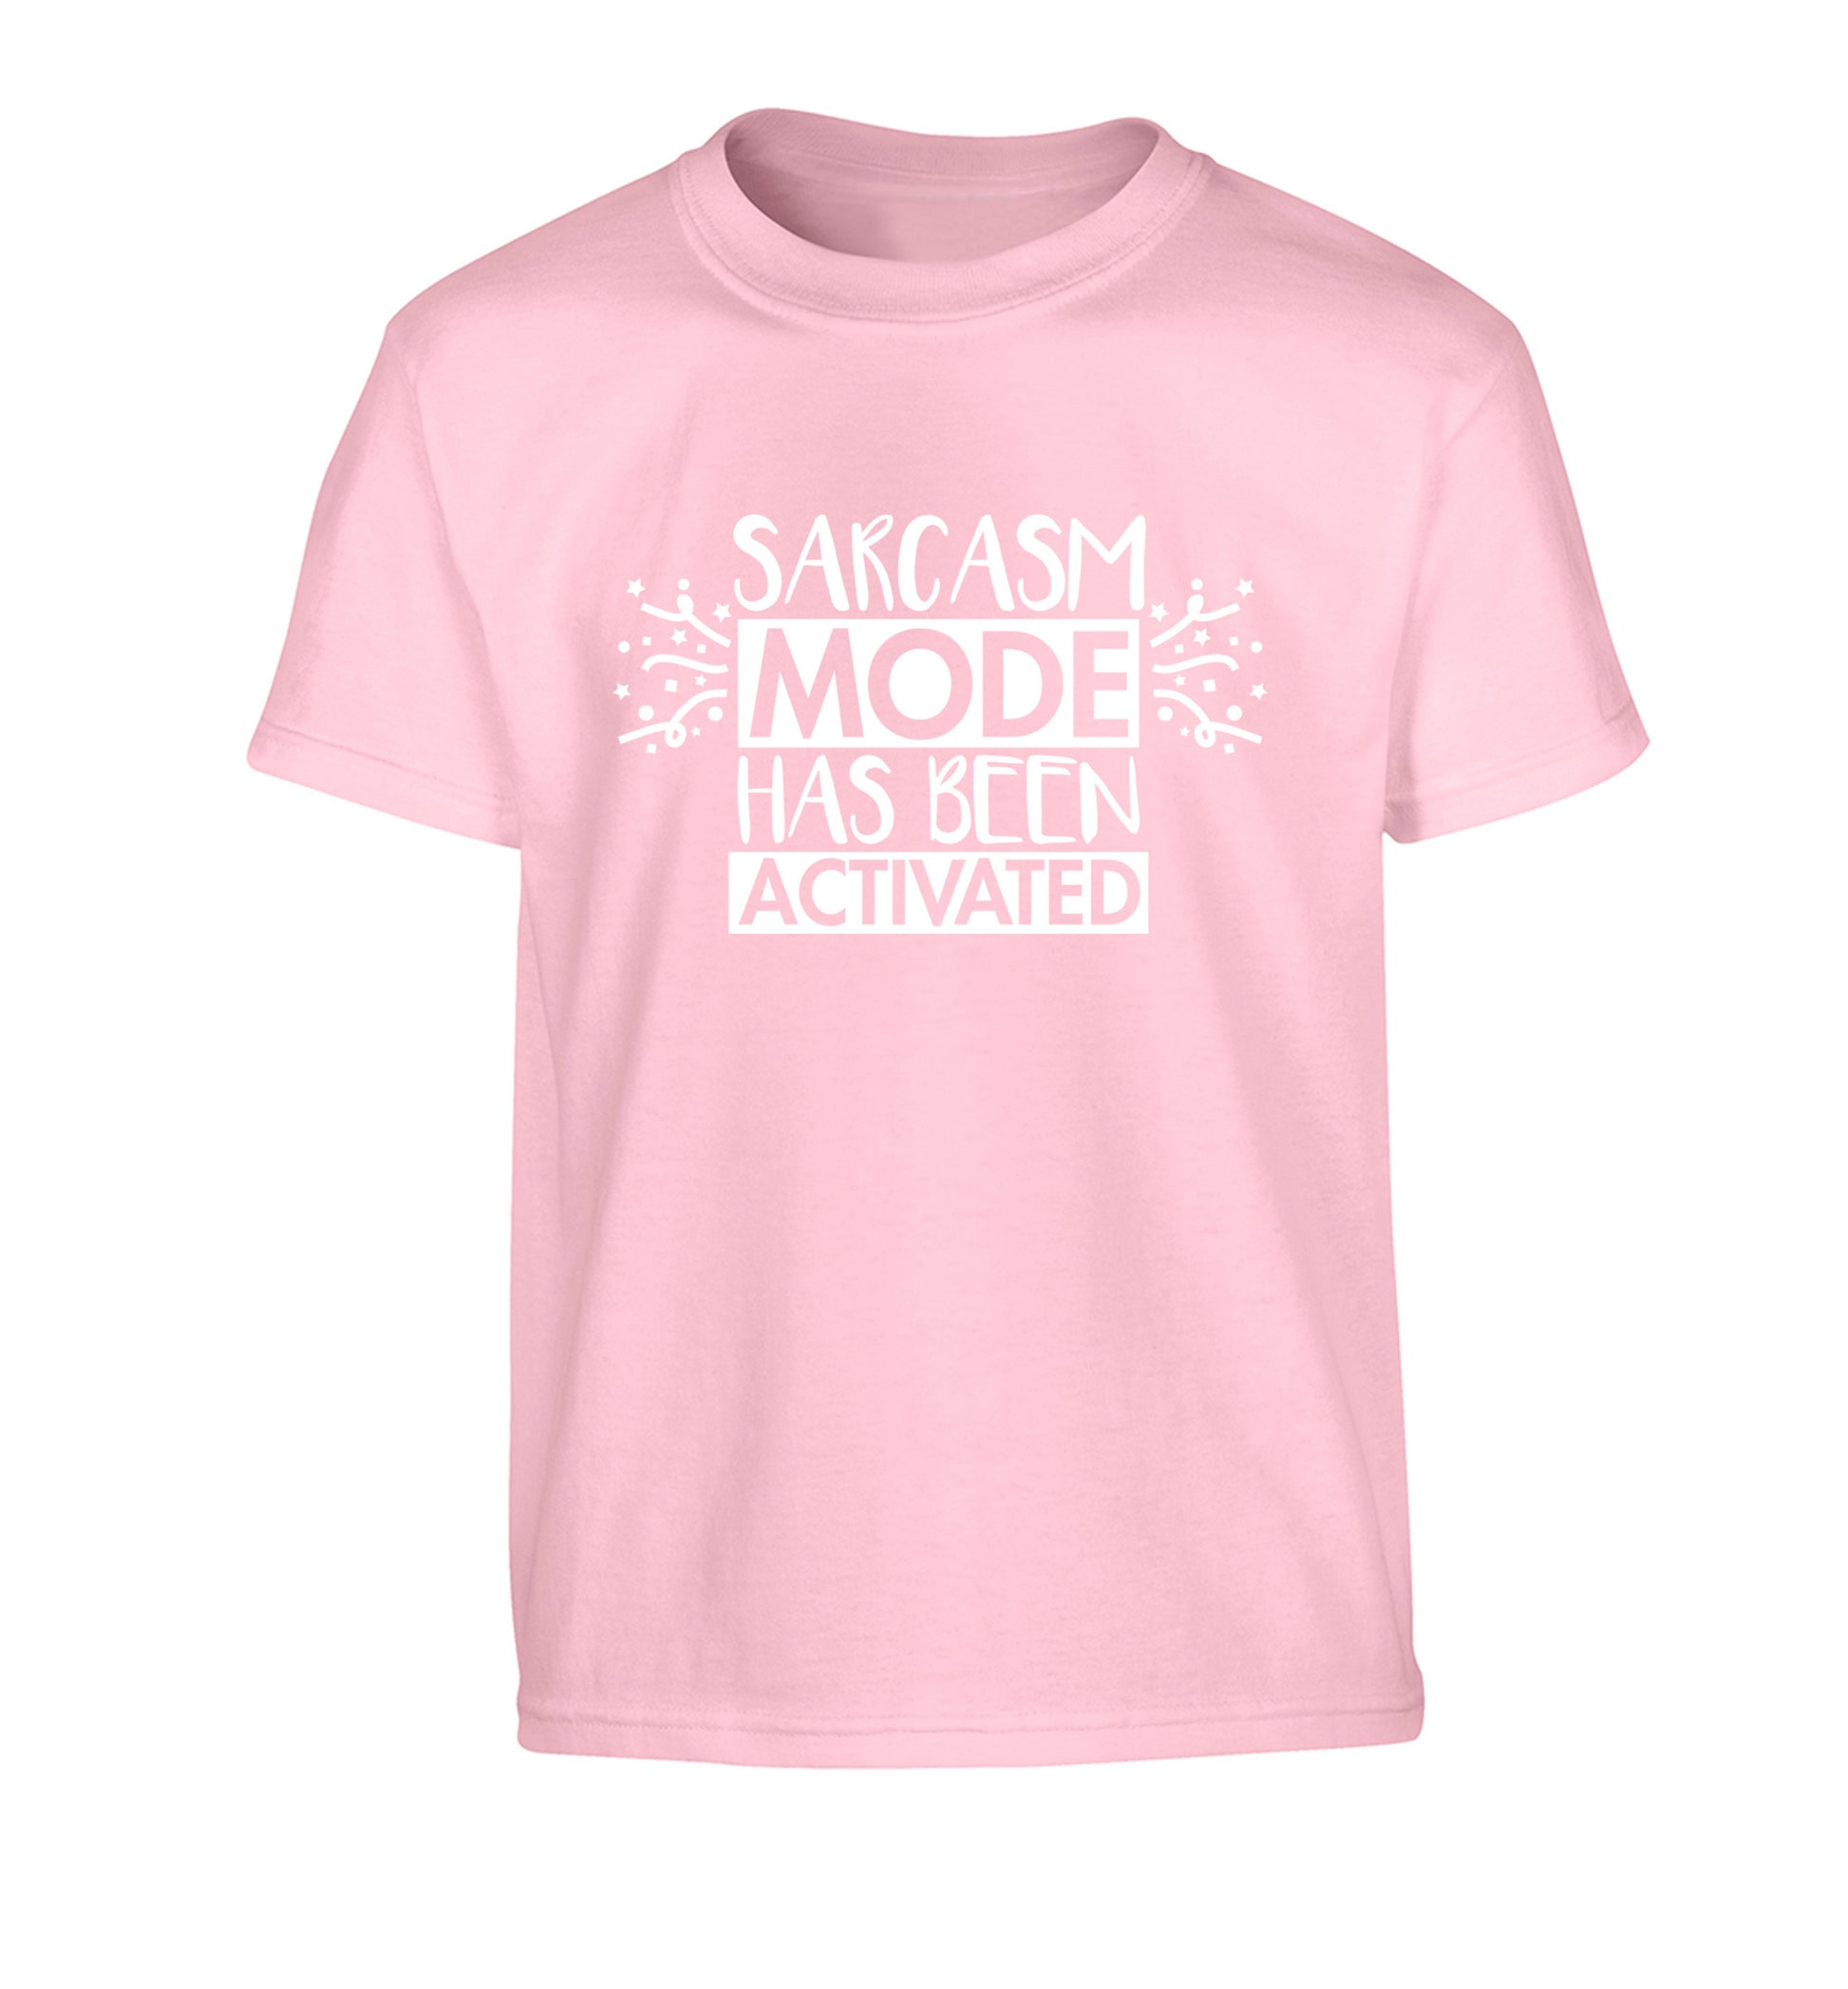 Sarcarsm mode has been activated Children's light pink Tshirt 12-14 Years